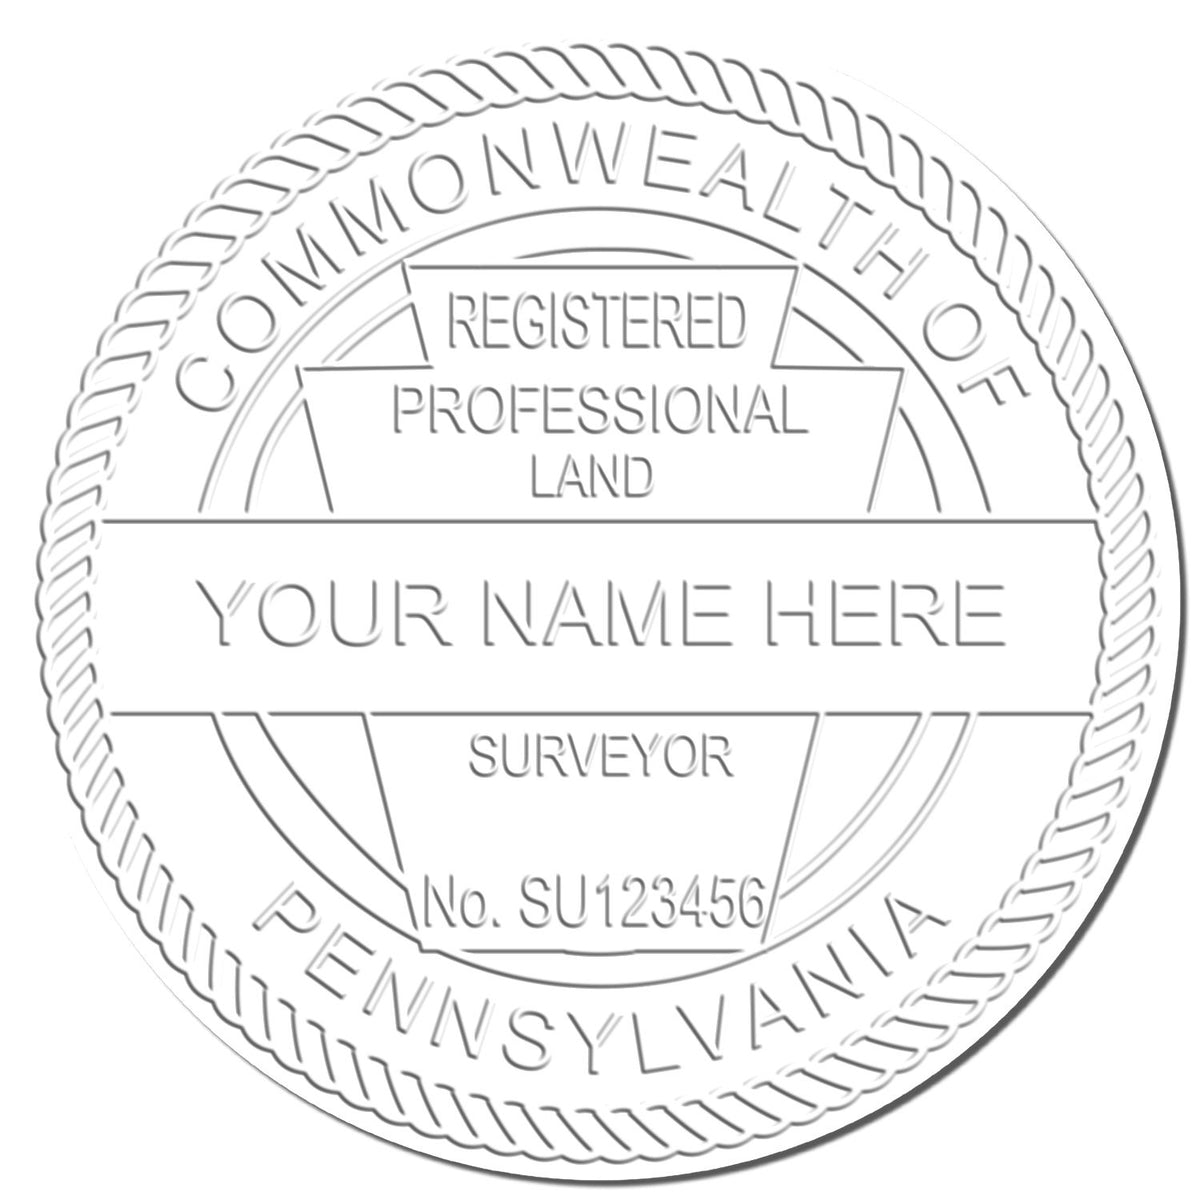 This paper is stamped with a sample imprint of the Hybrid Pennsylvania Land Surveyor Seal, signifying its quality and reliability.